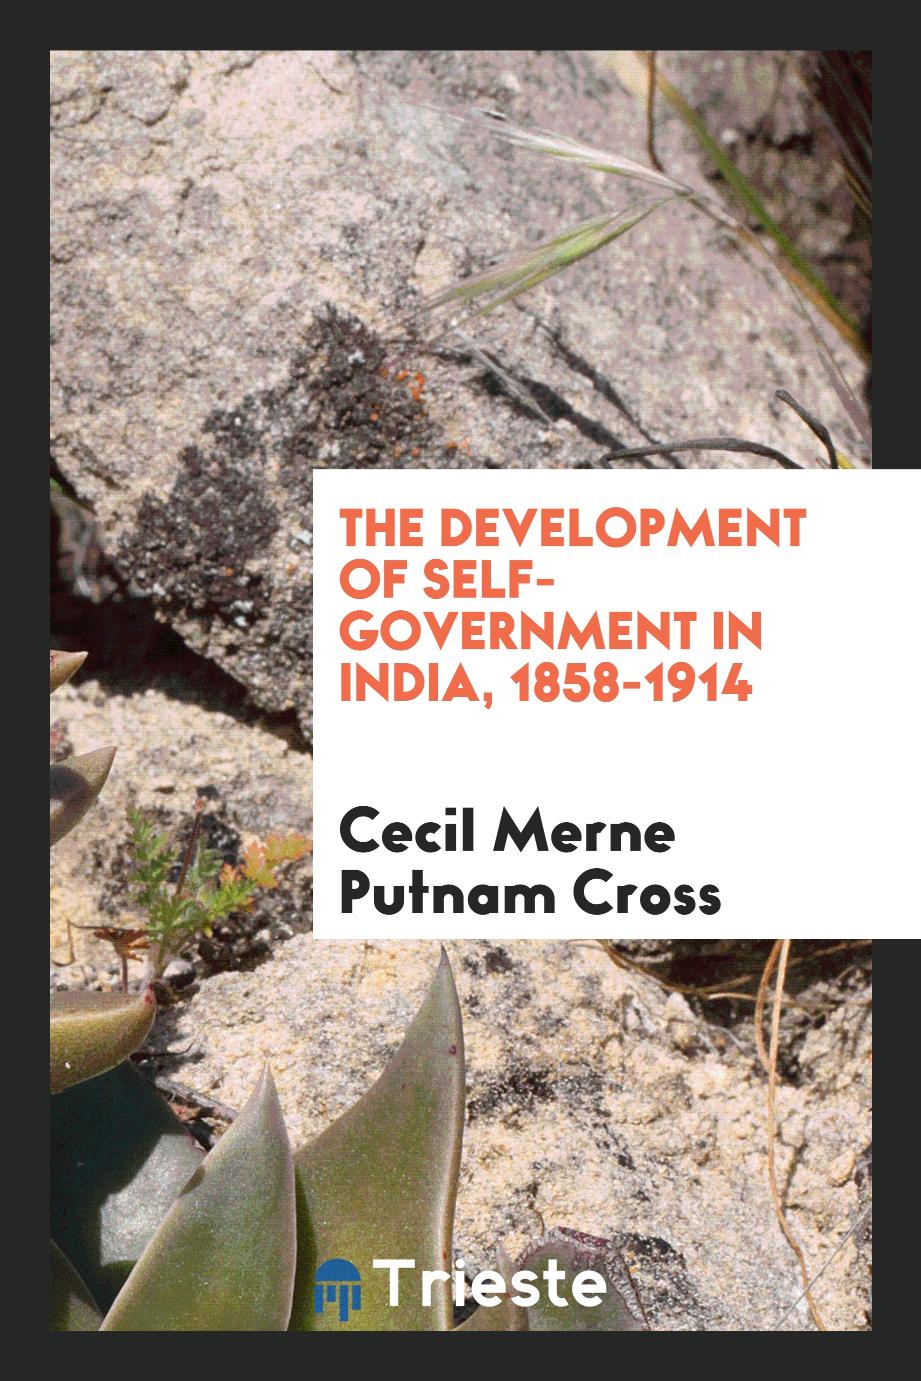 The development of self-government in India, 1858-1914